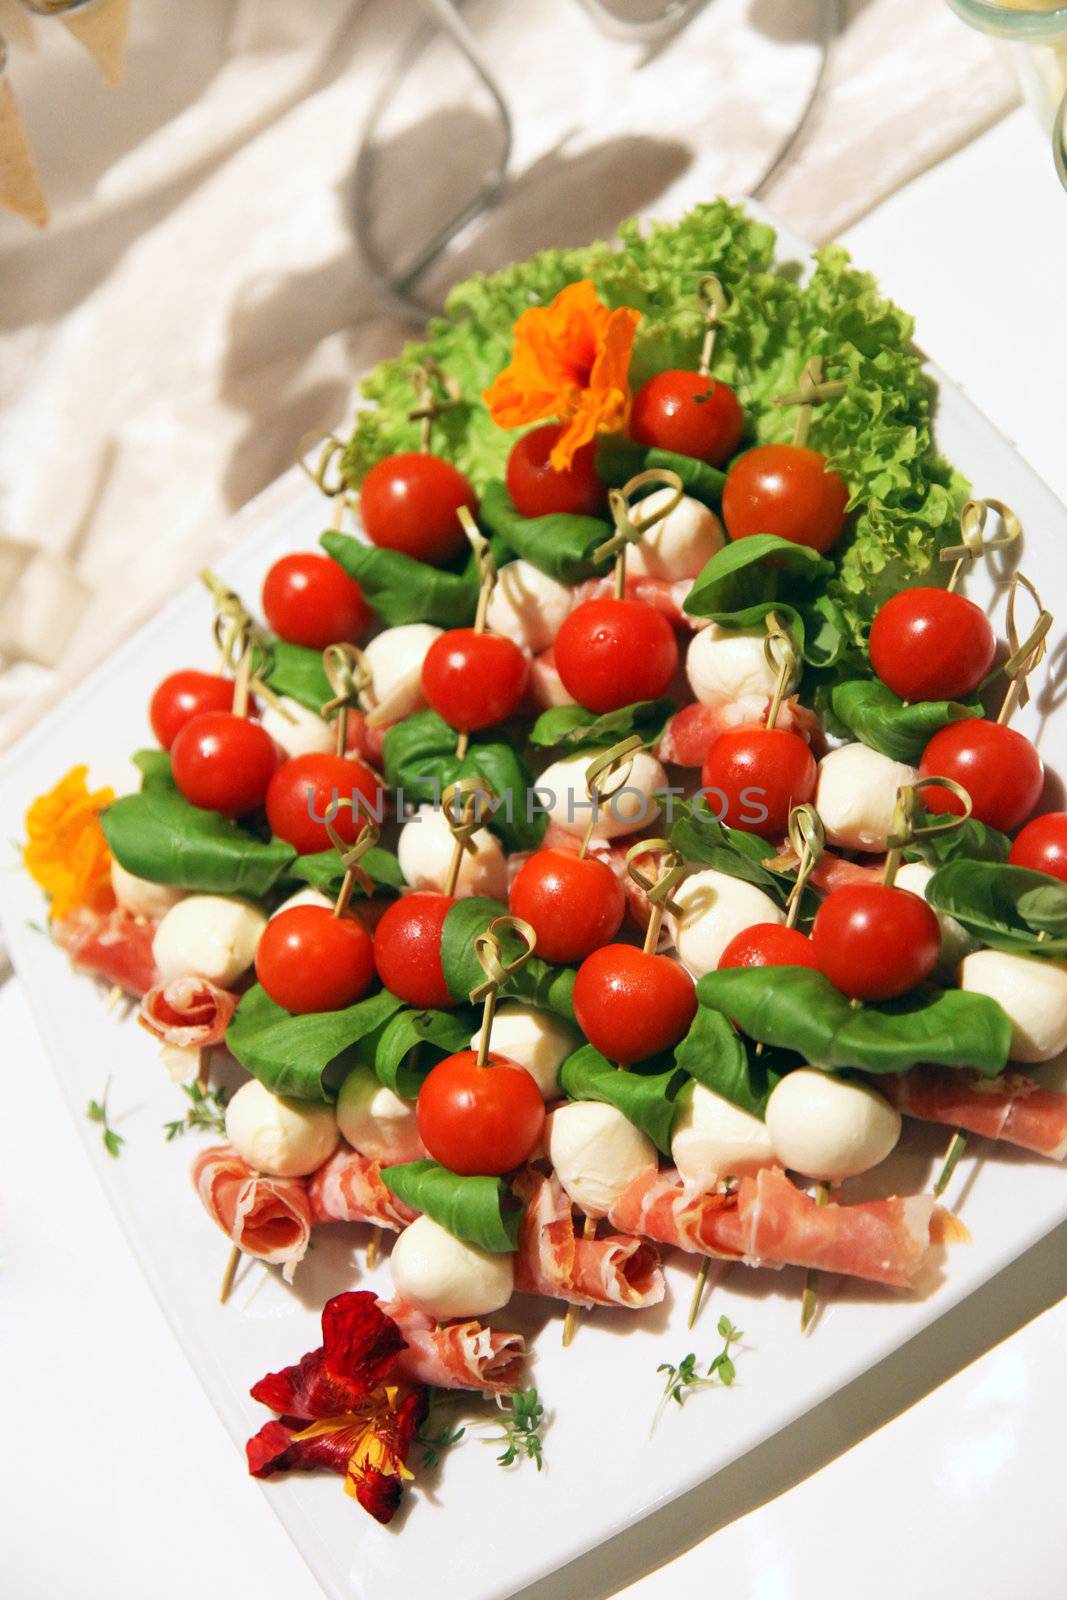 Catering display of colouful appetizers with fresh cherry tomatoes, mushrooms and rolled ham served on a plate at a cold buffet Catering display of colouful appetizers with fresh cherry tomatoes, mushrooms and rolled ham served on a plate 